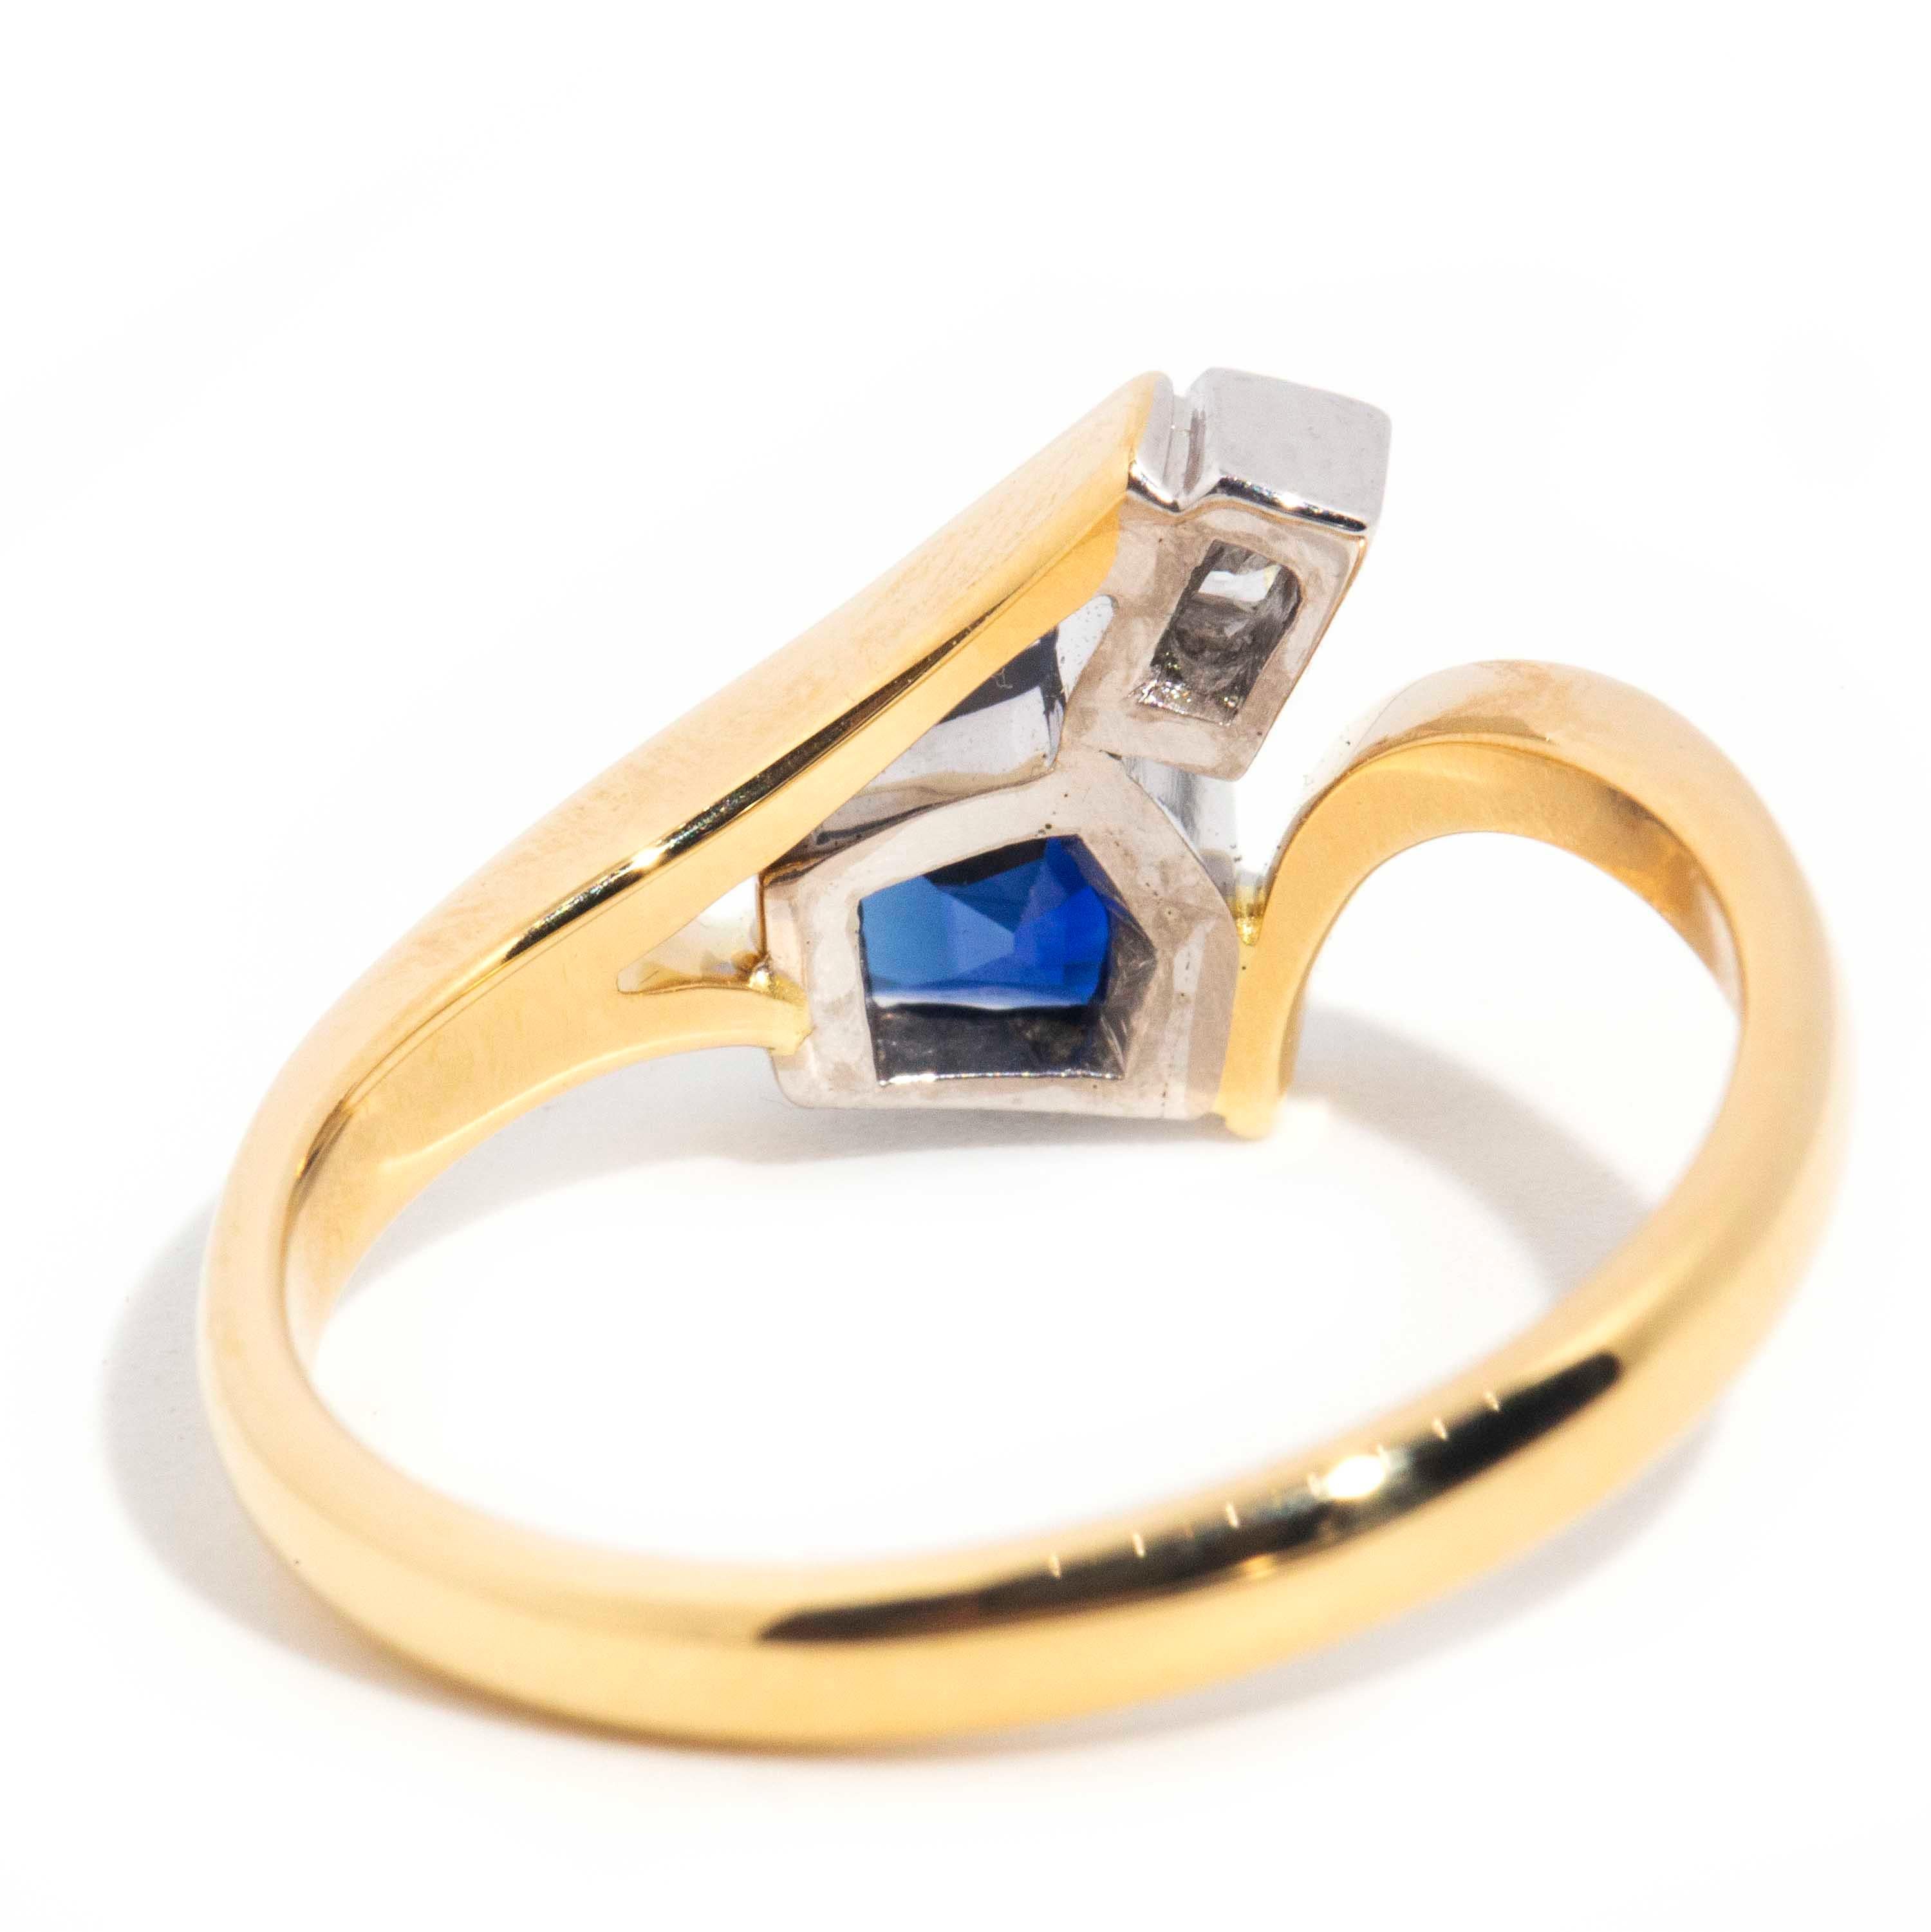 Contemporary 18 Carat Gold Freeform Ceylon Sapphire and Diamond Crossover Ring In Good Condition For Sale In Hamilton, AU